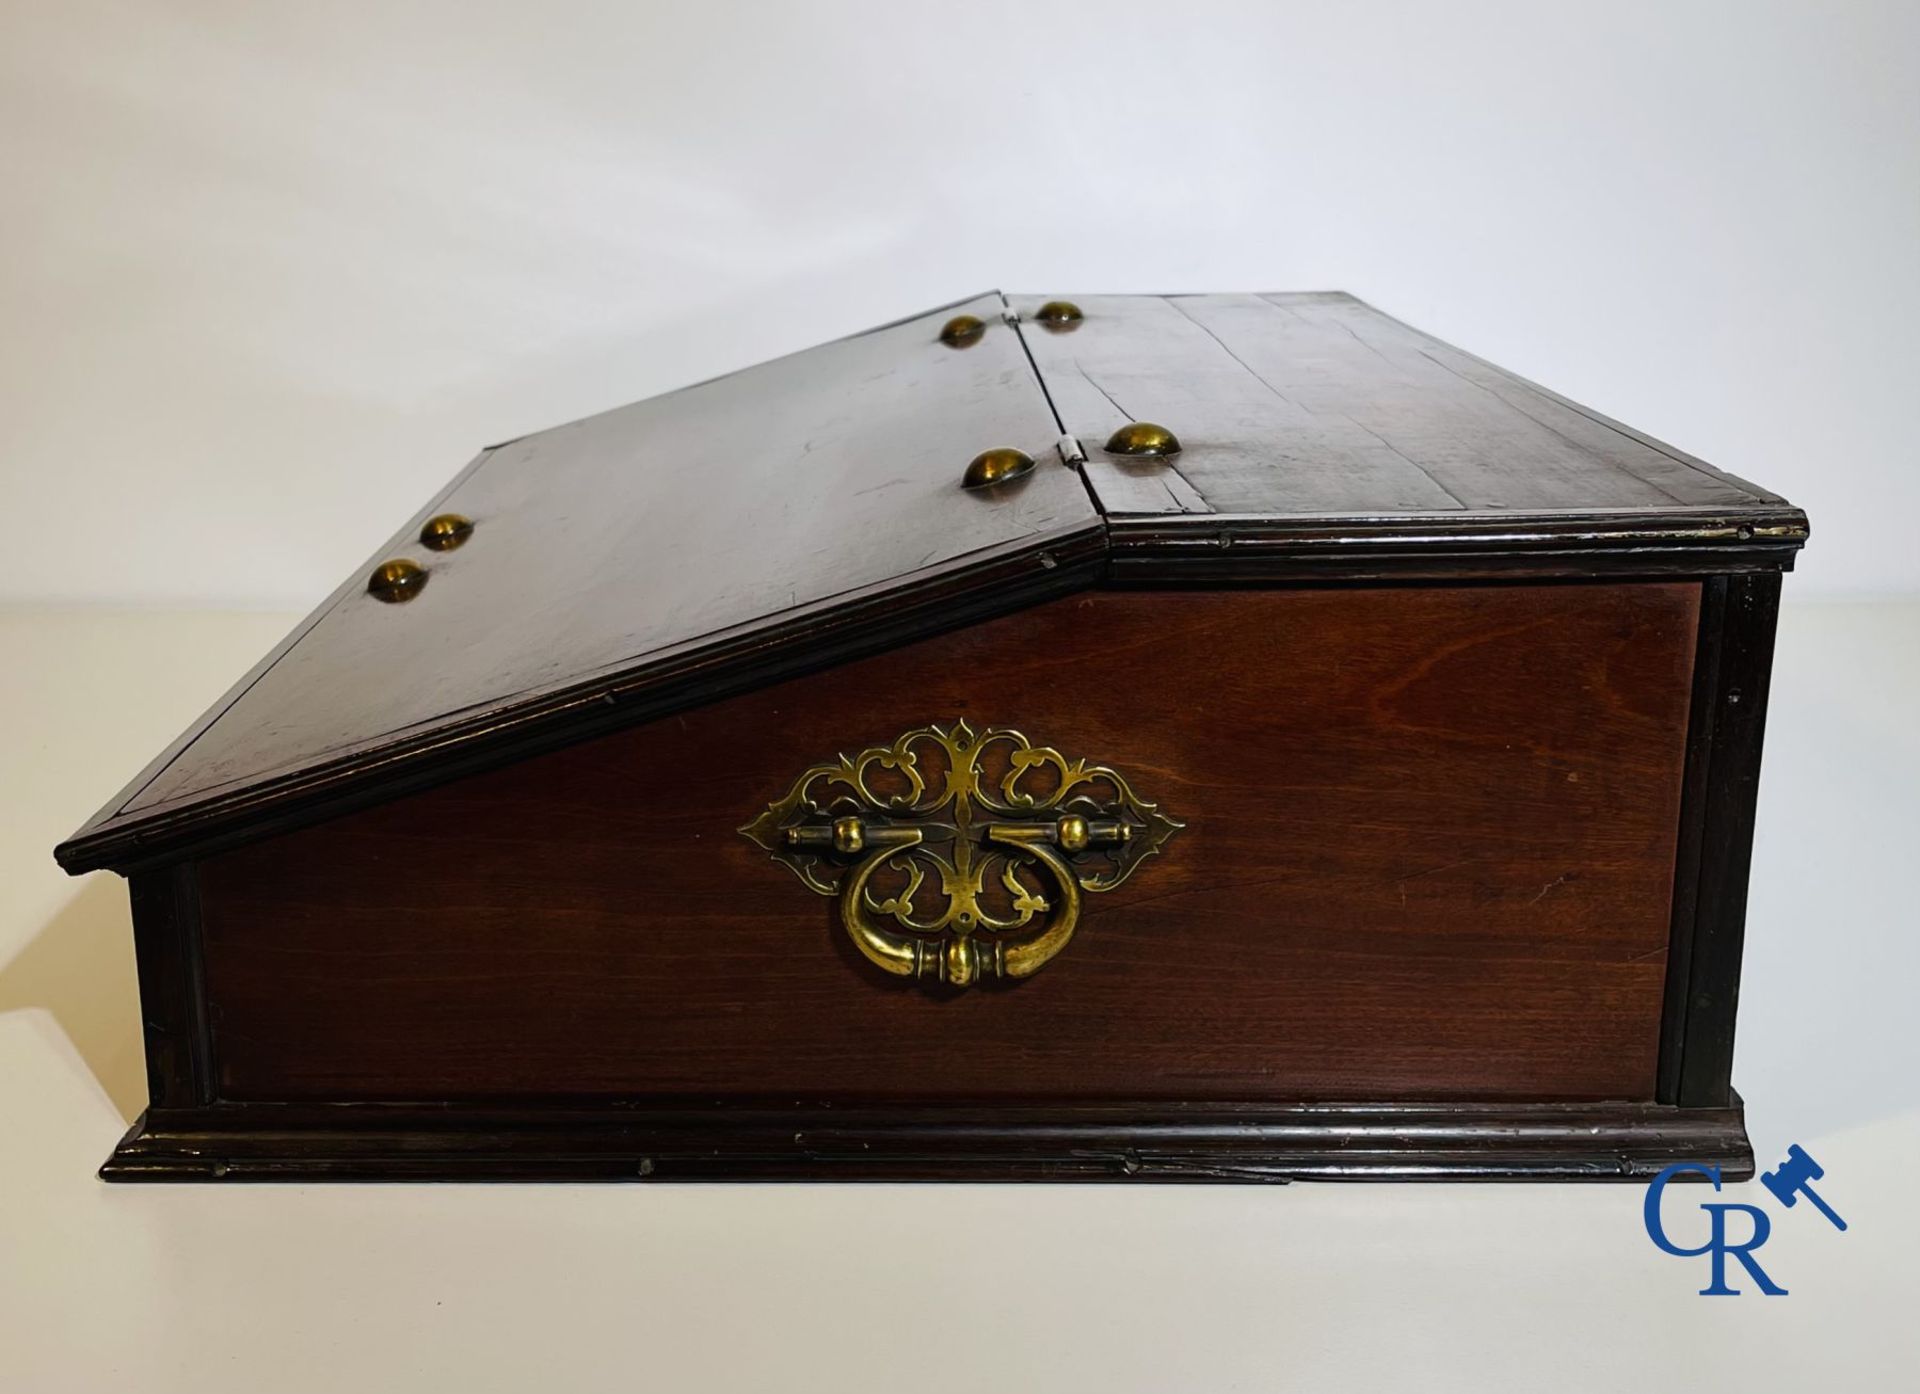 A large mahogany writing case with bronze fittings. Early 19th century. - Image 5 of 6